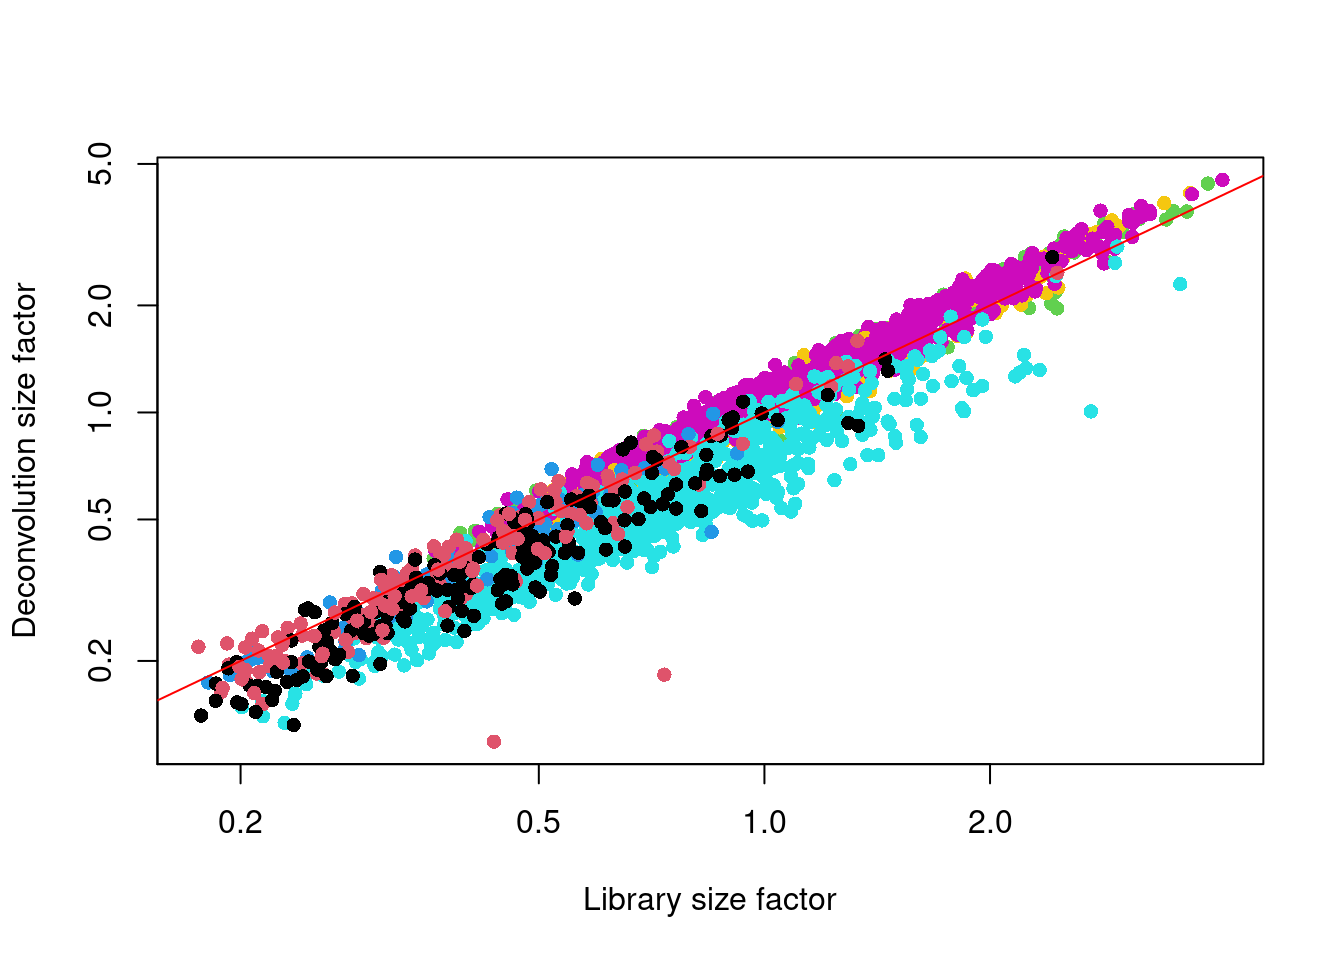 Deconvolution size factor for each cell in the Zeisel brain dataset, compared to the equivalent size factor derived from the library size. The red line corresponds to identity between the two size factors.